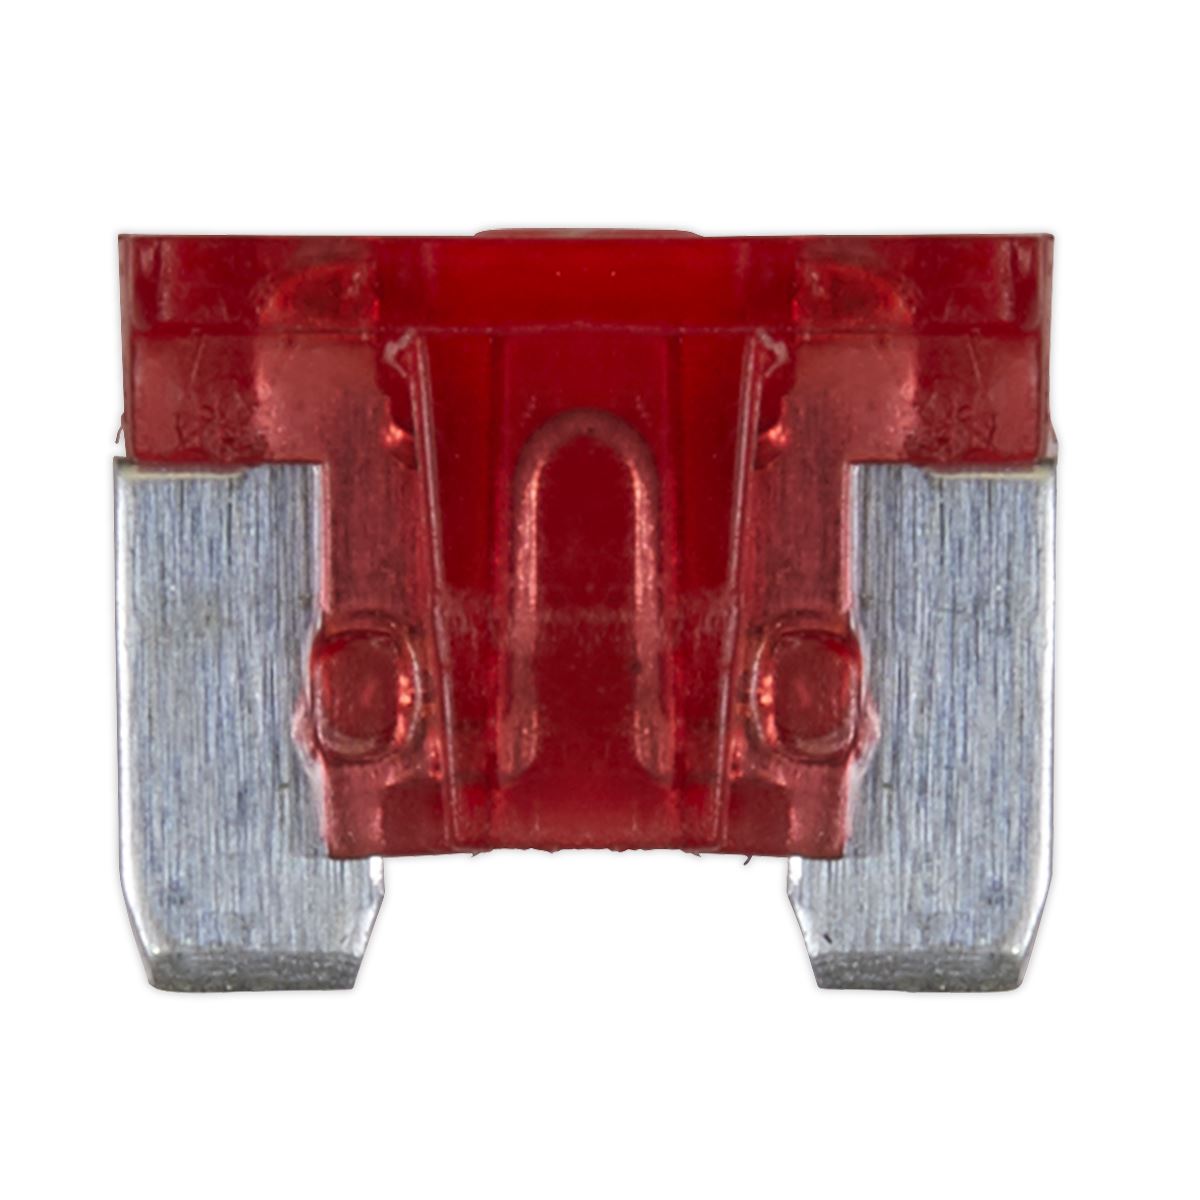 Sealey Automotive MICRO Blade Fuse 10A - Pack of 50